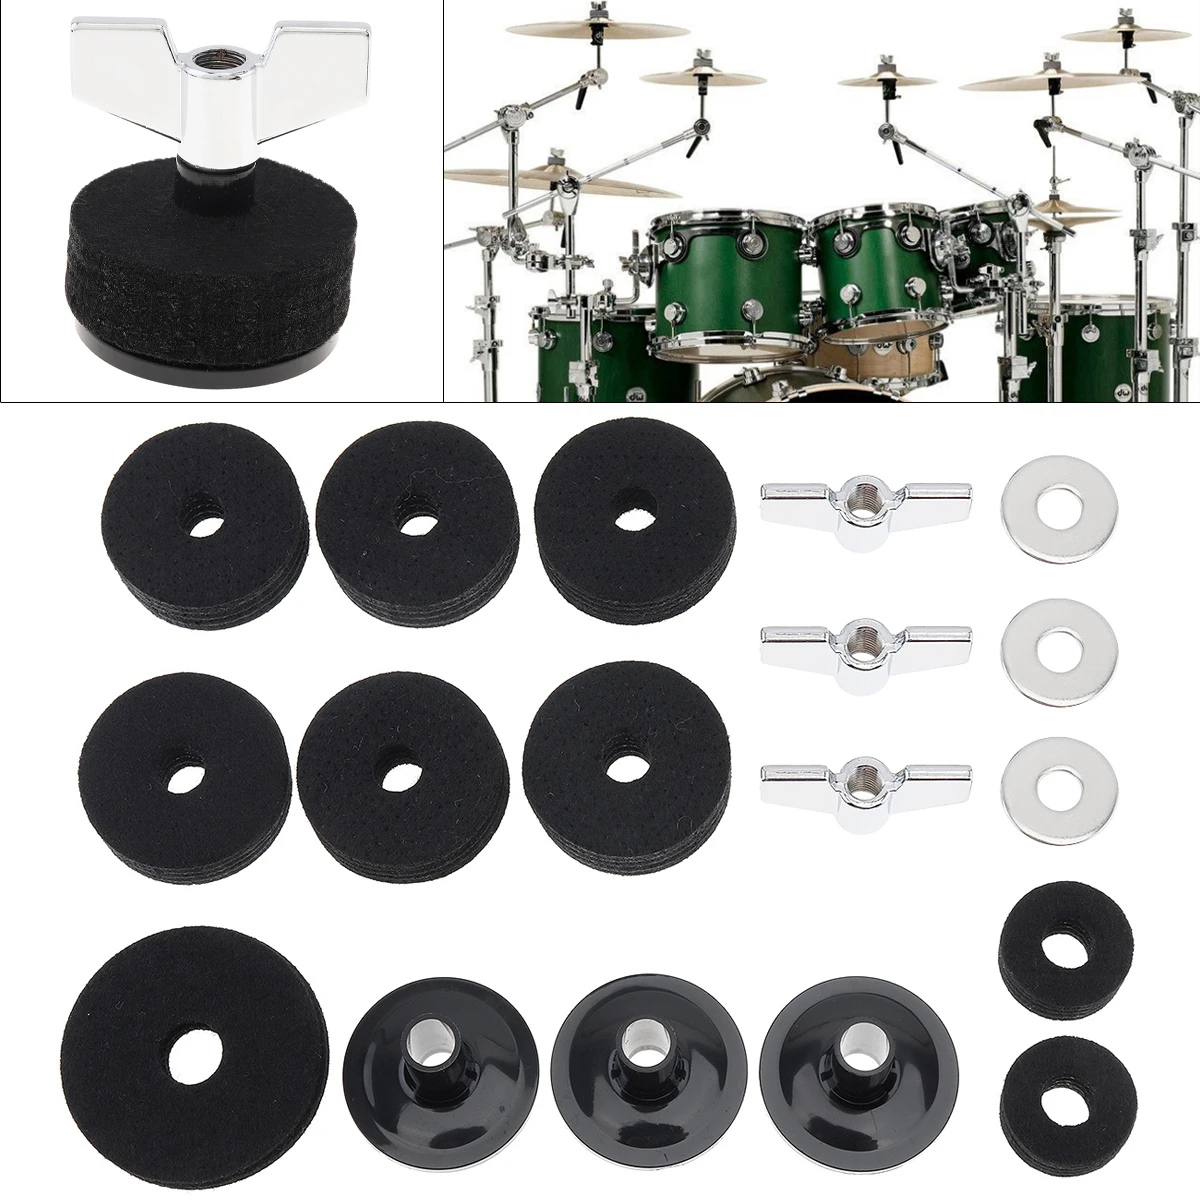 

18pcs Jazz Drum Cymbal Felt Pads Parts Replacement Kits with Cymbal Sleeves & Wing Nuts & Washers & Wool Felt Pads Accessories